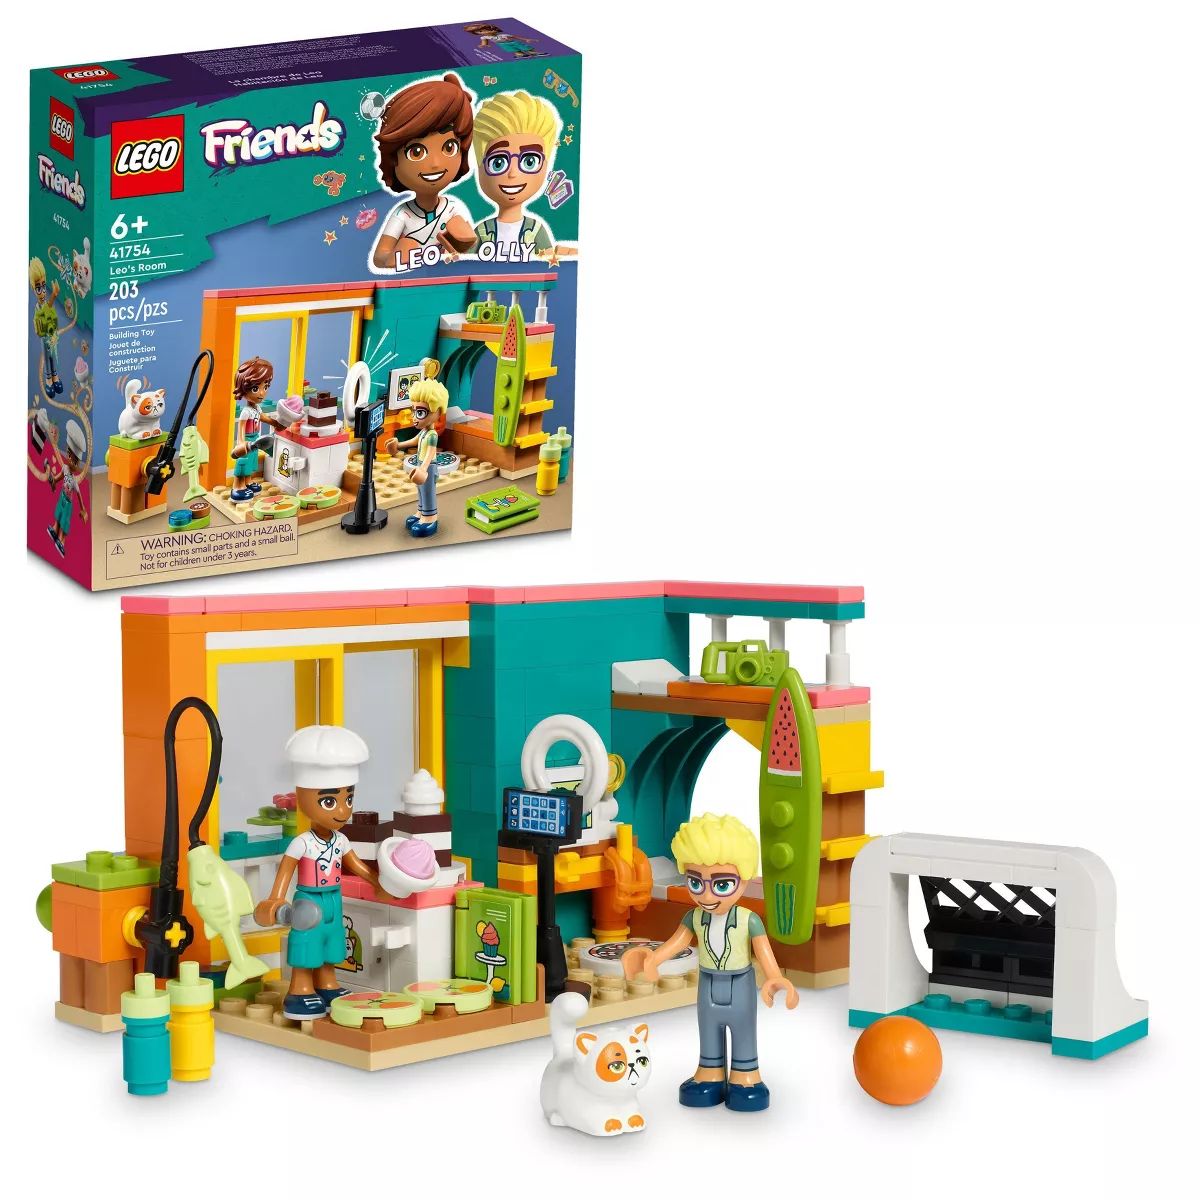 LEGO Friends Leo's Room Baking Themed Playset with Pet 41754 | Target